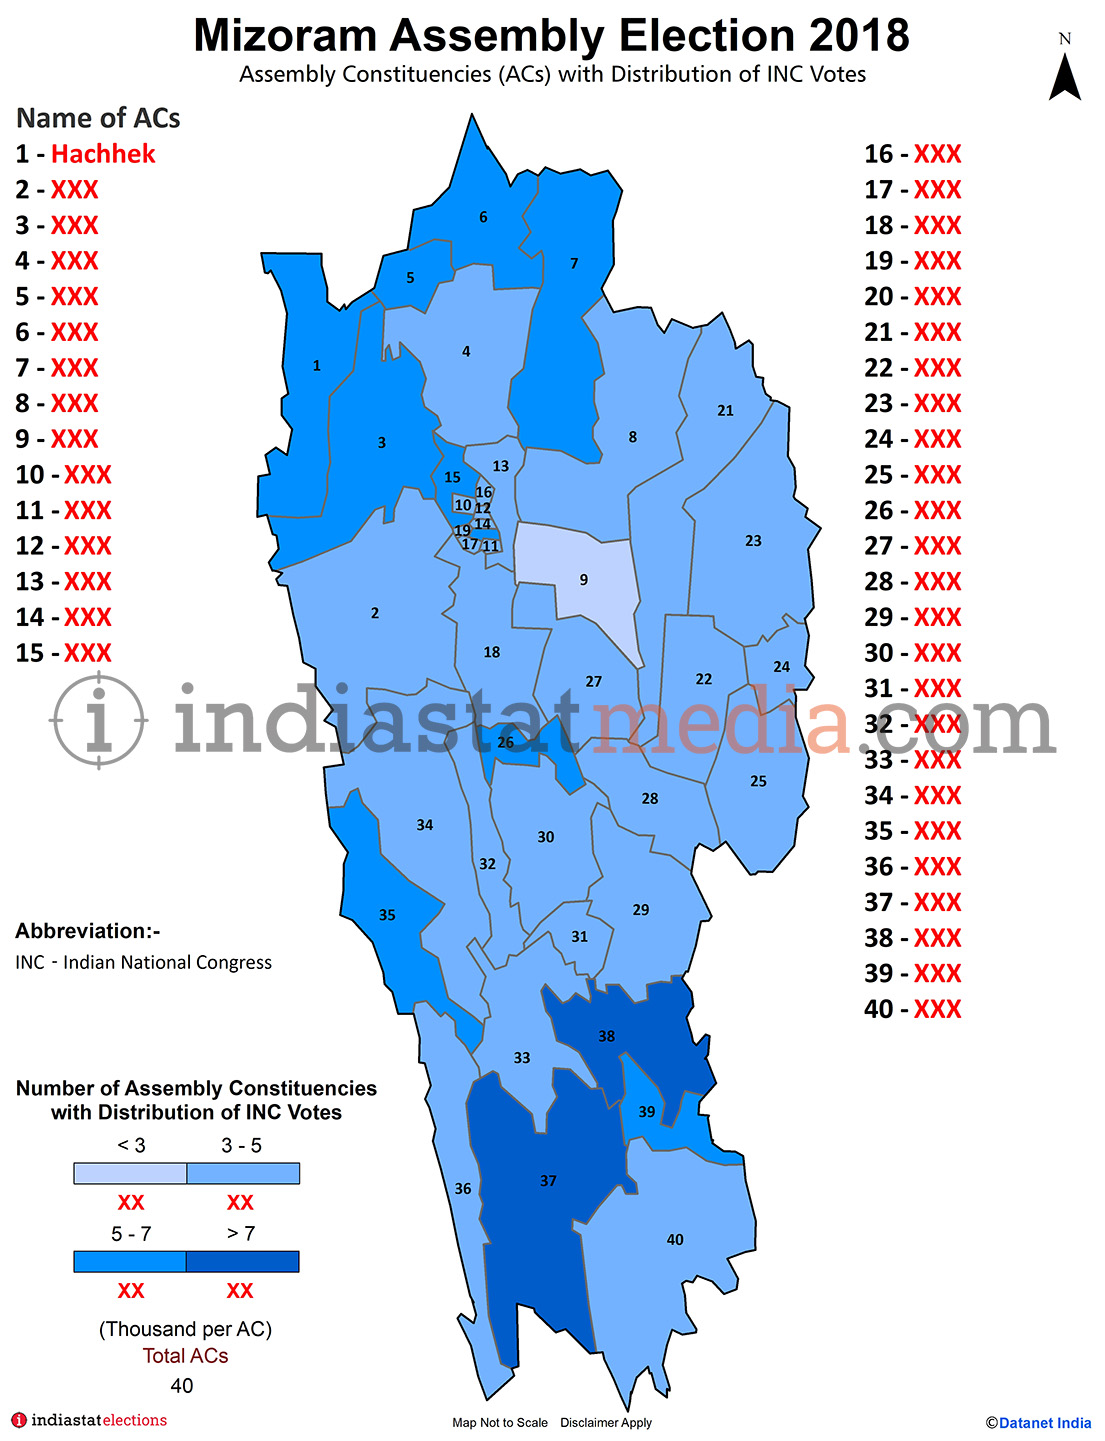 Distribution of INC Votes by Constituencies in Mizoram (Assembly Election - 2018)